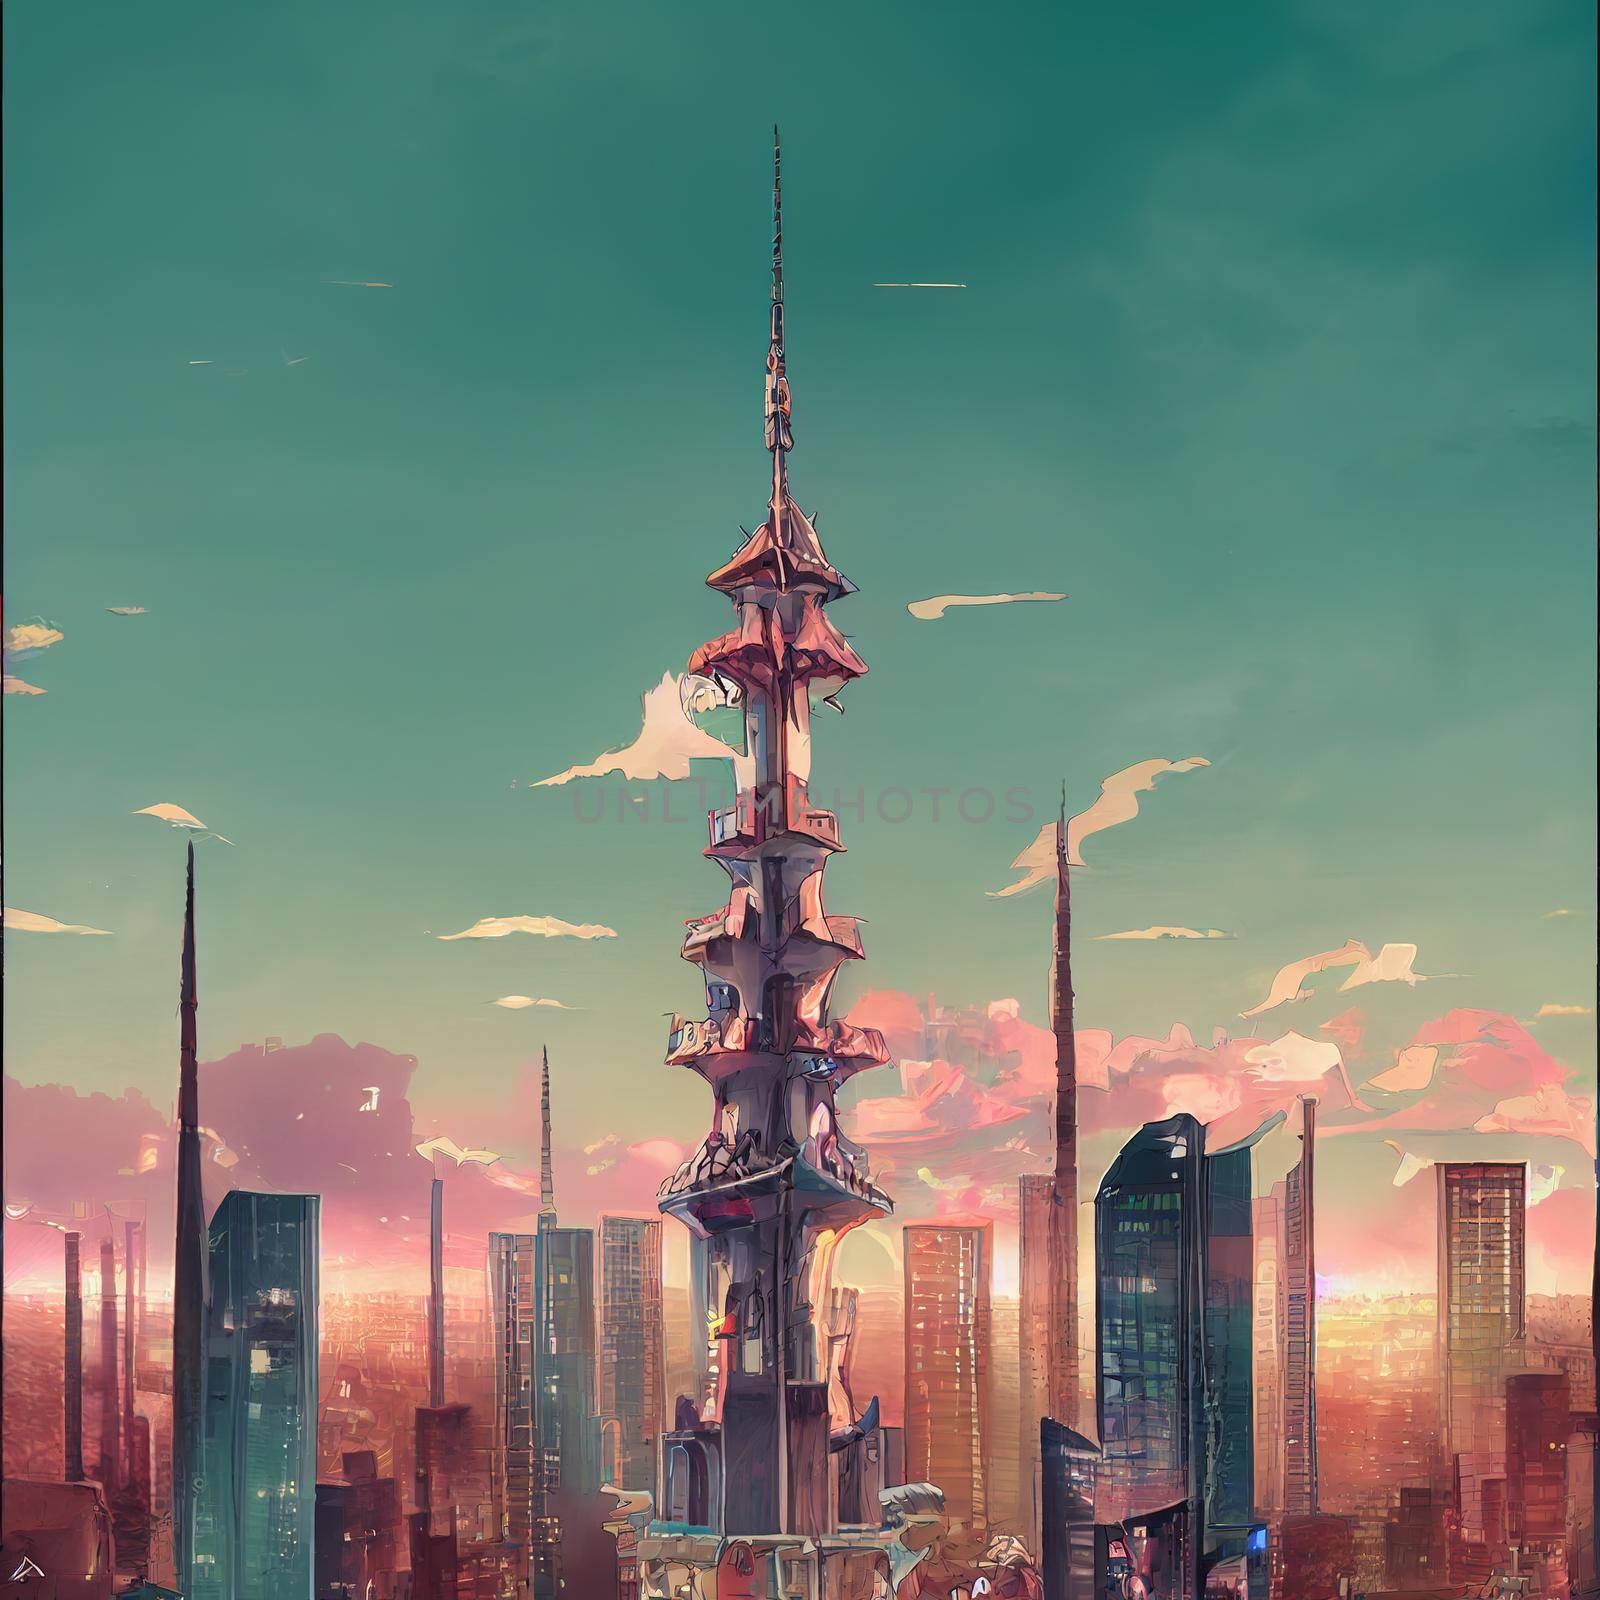 anime style city with futuristic skycrappers. High quality 3d illustration